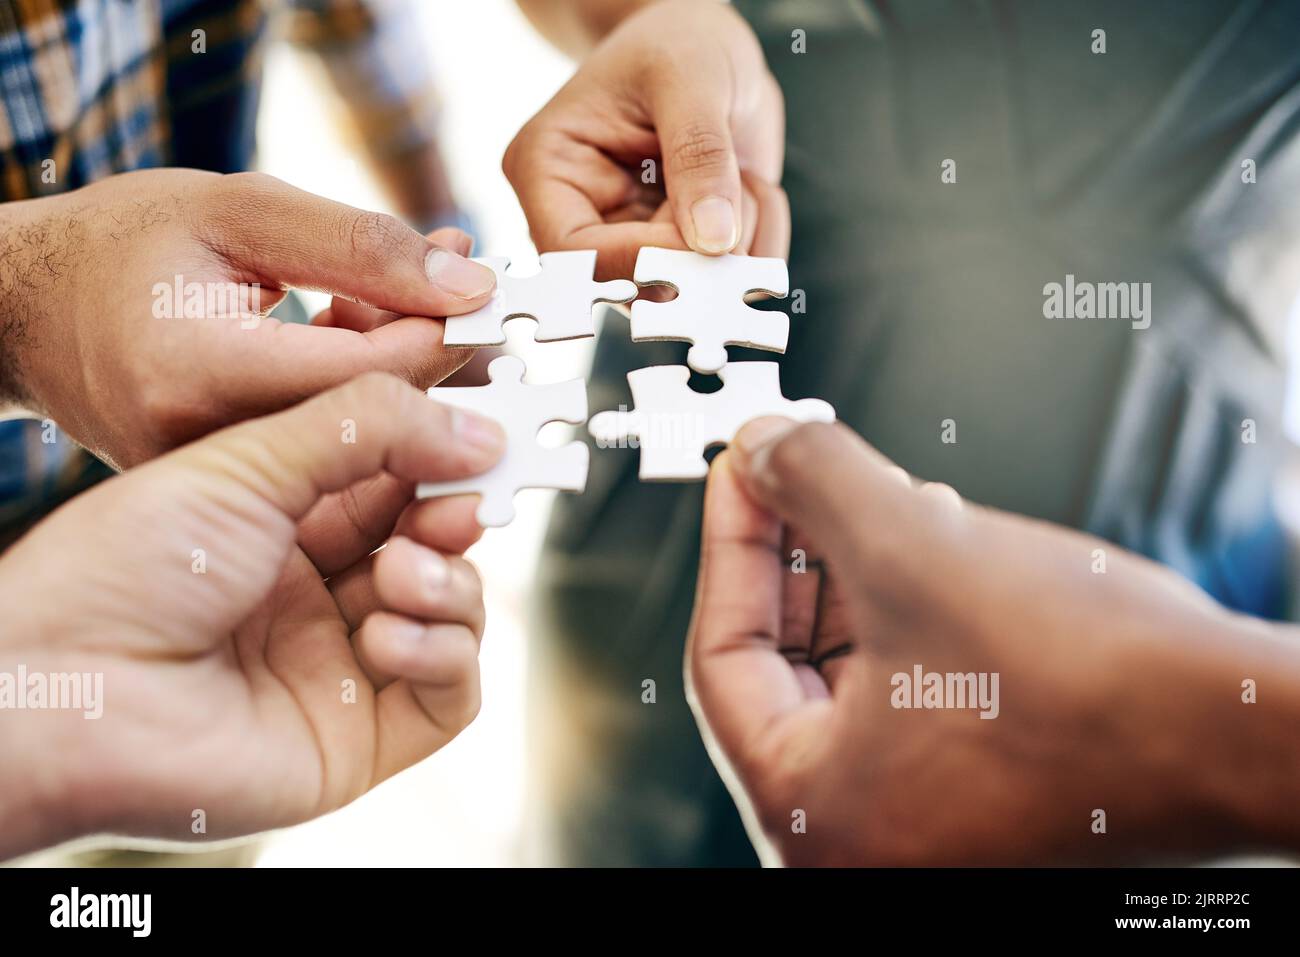 Theyre all a part of the bigger picture. a work group connecting pieces of a puzzle. Stock Photo